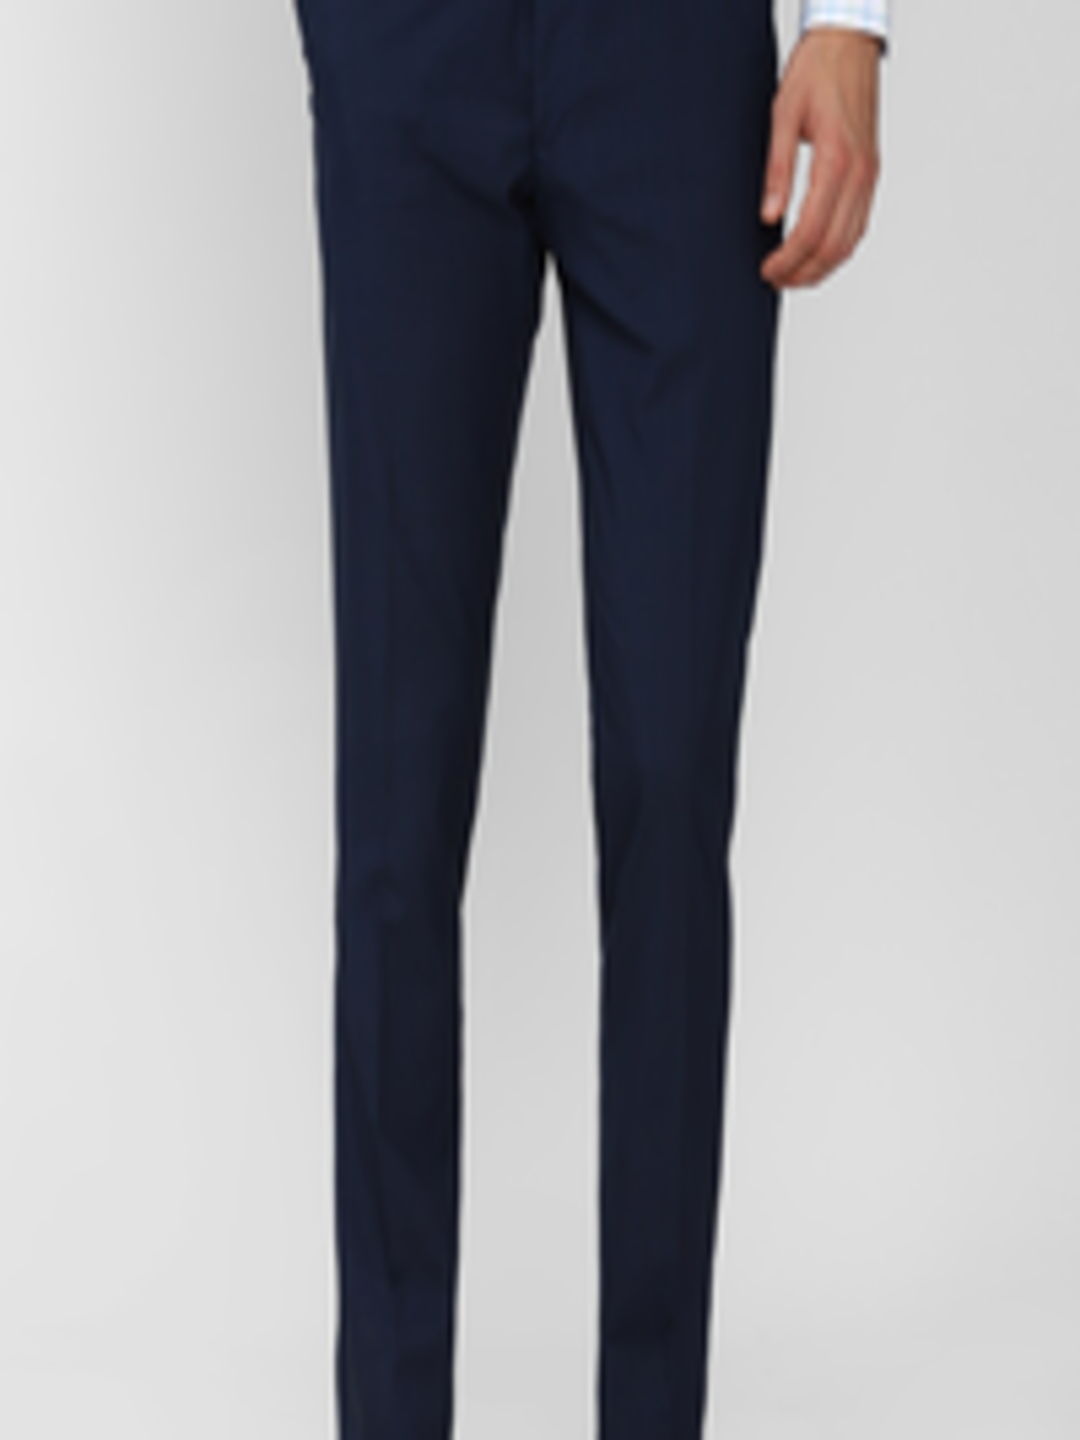 Buy Peter England Men Navy Blue Slim Fit Trousers - Trousers for Men ...